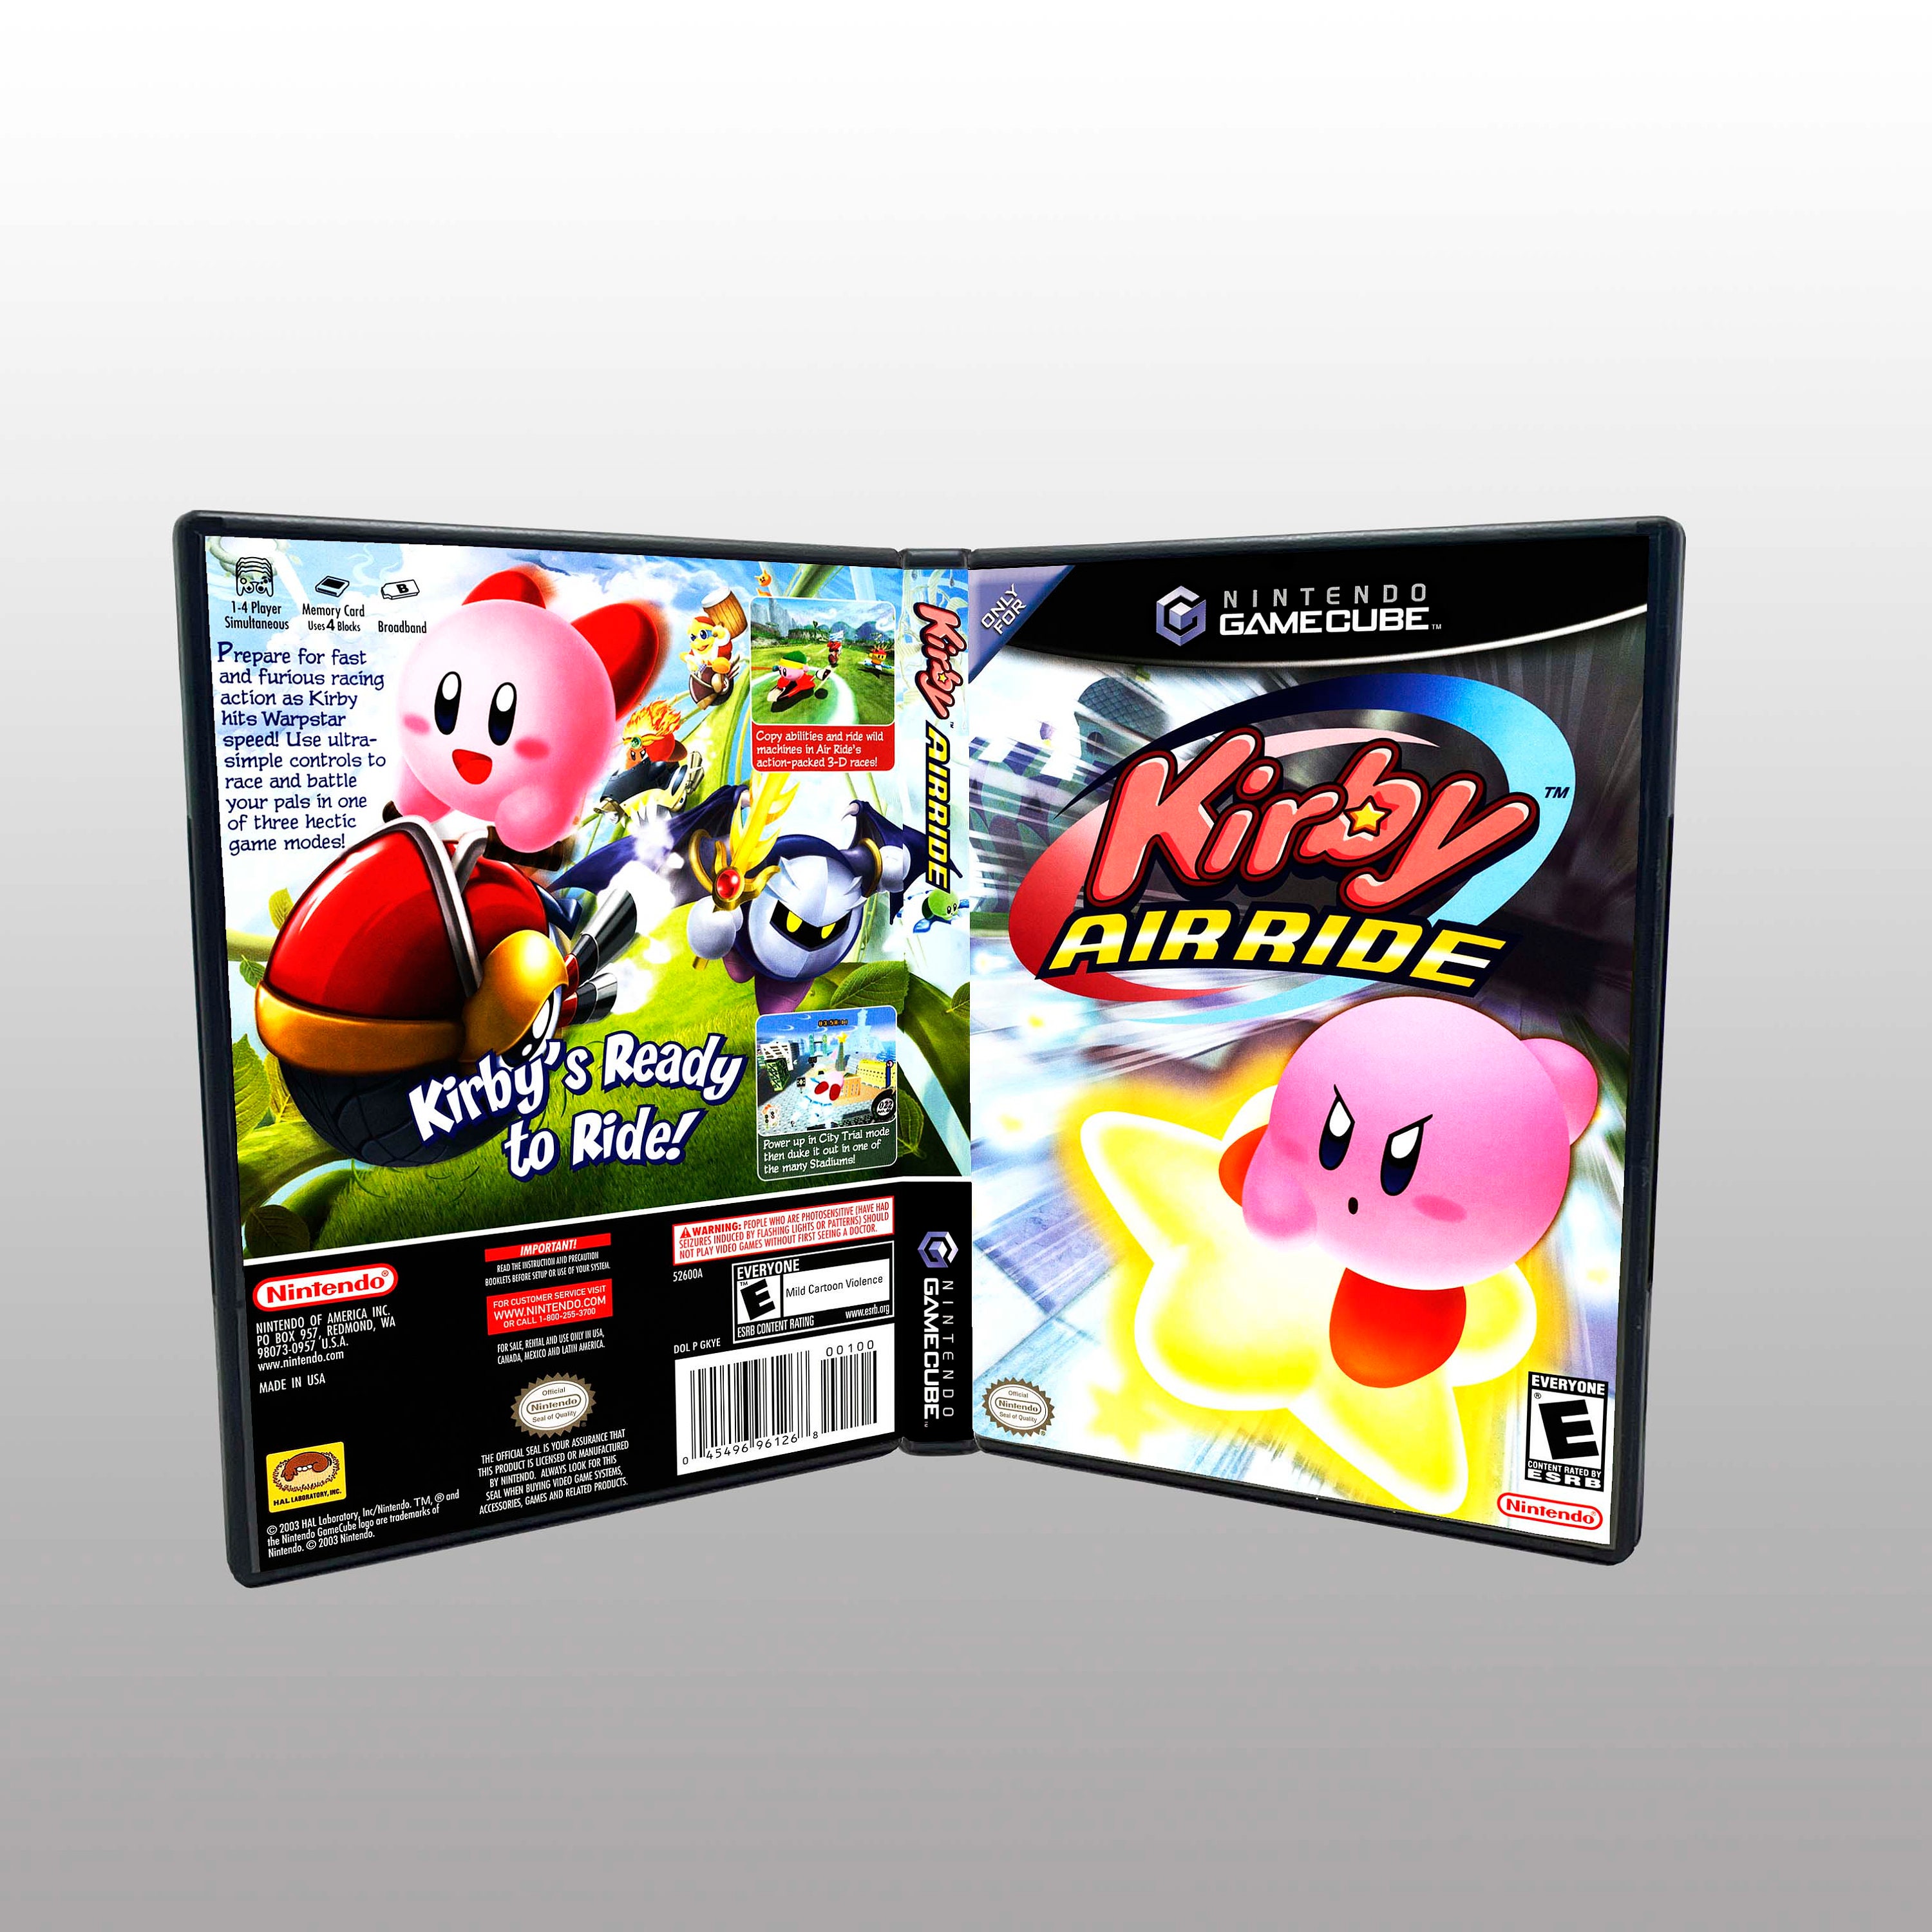 Kirby Air Ride for Nintendo GameCube 